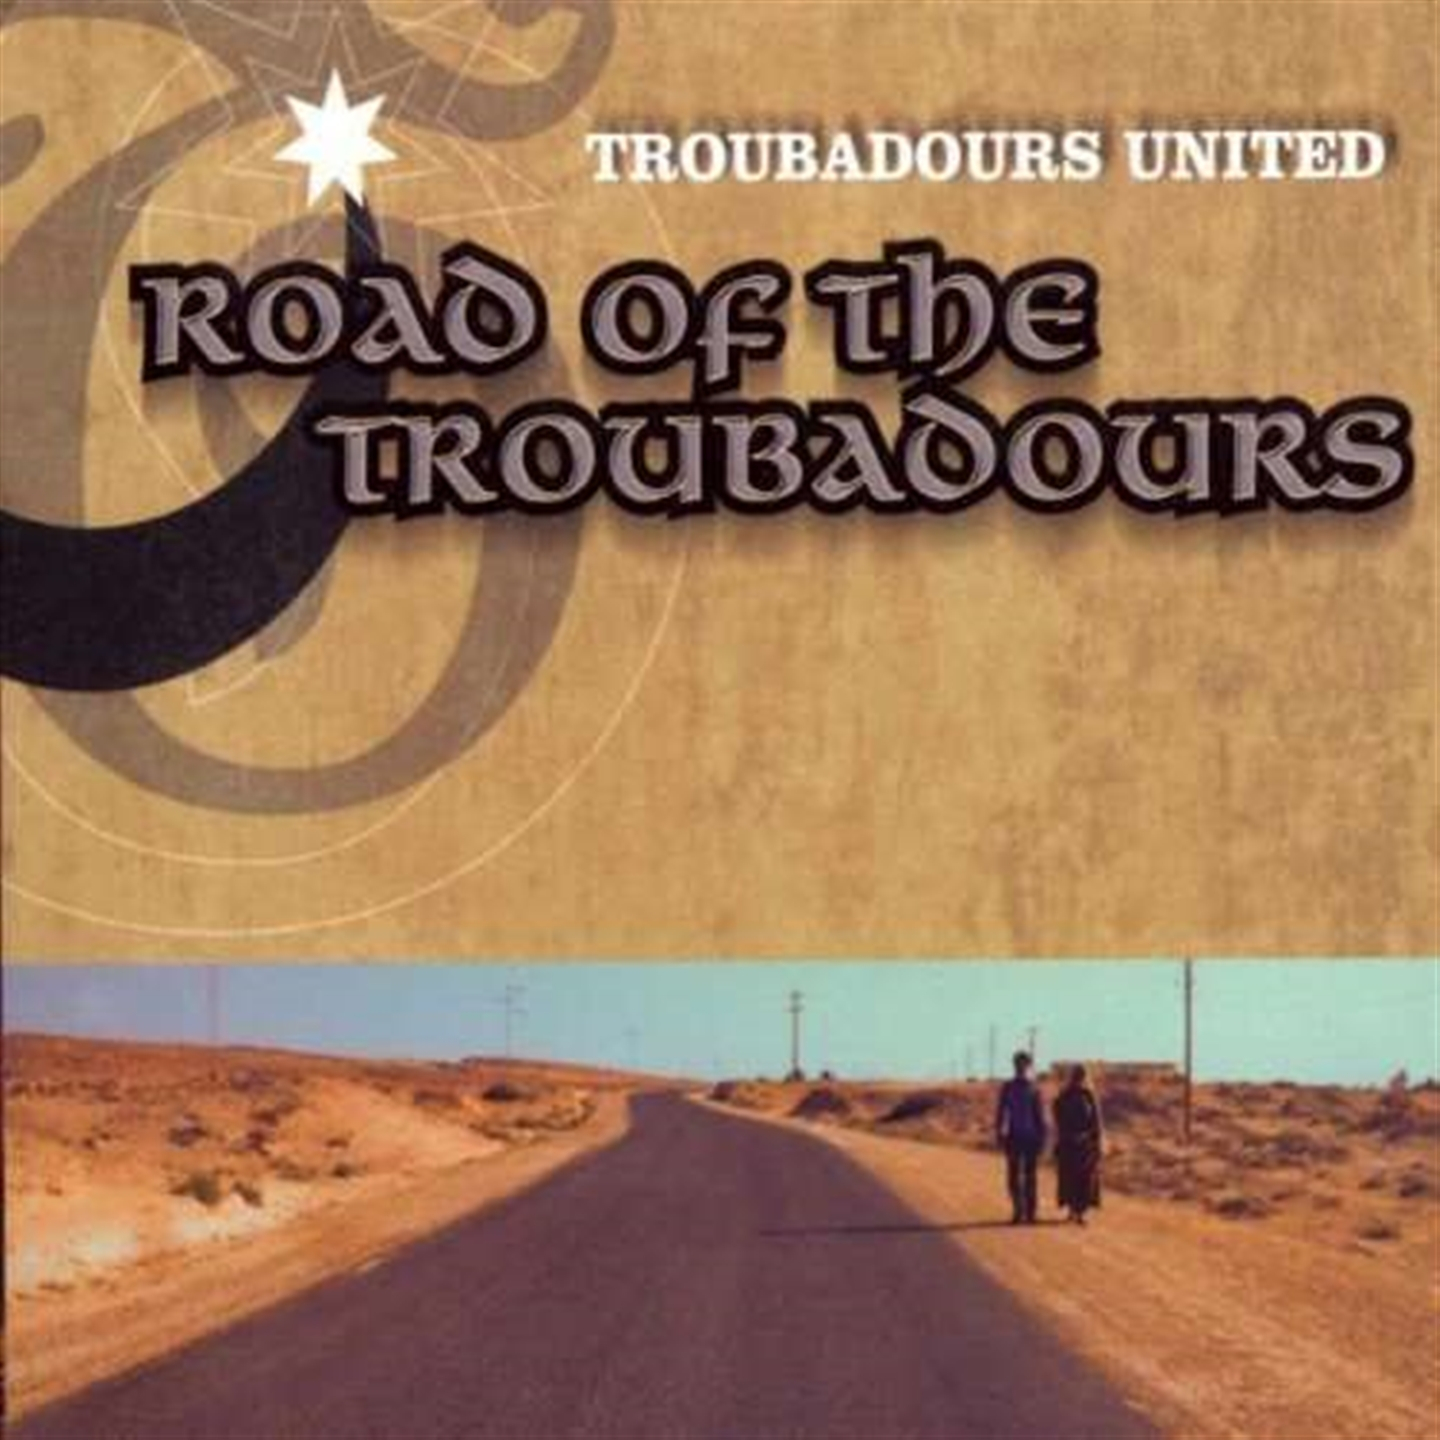 ROAD OF THE TROUBADOURS